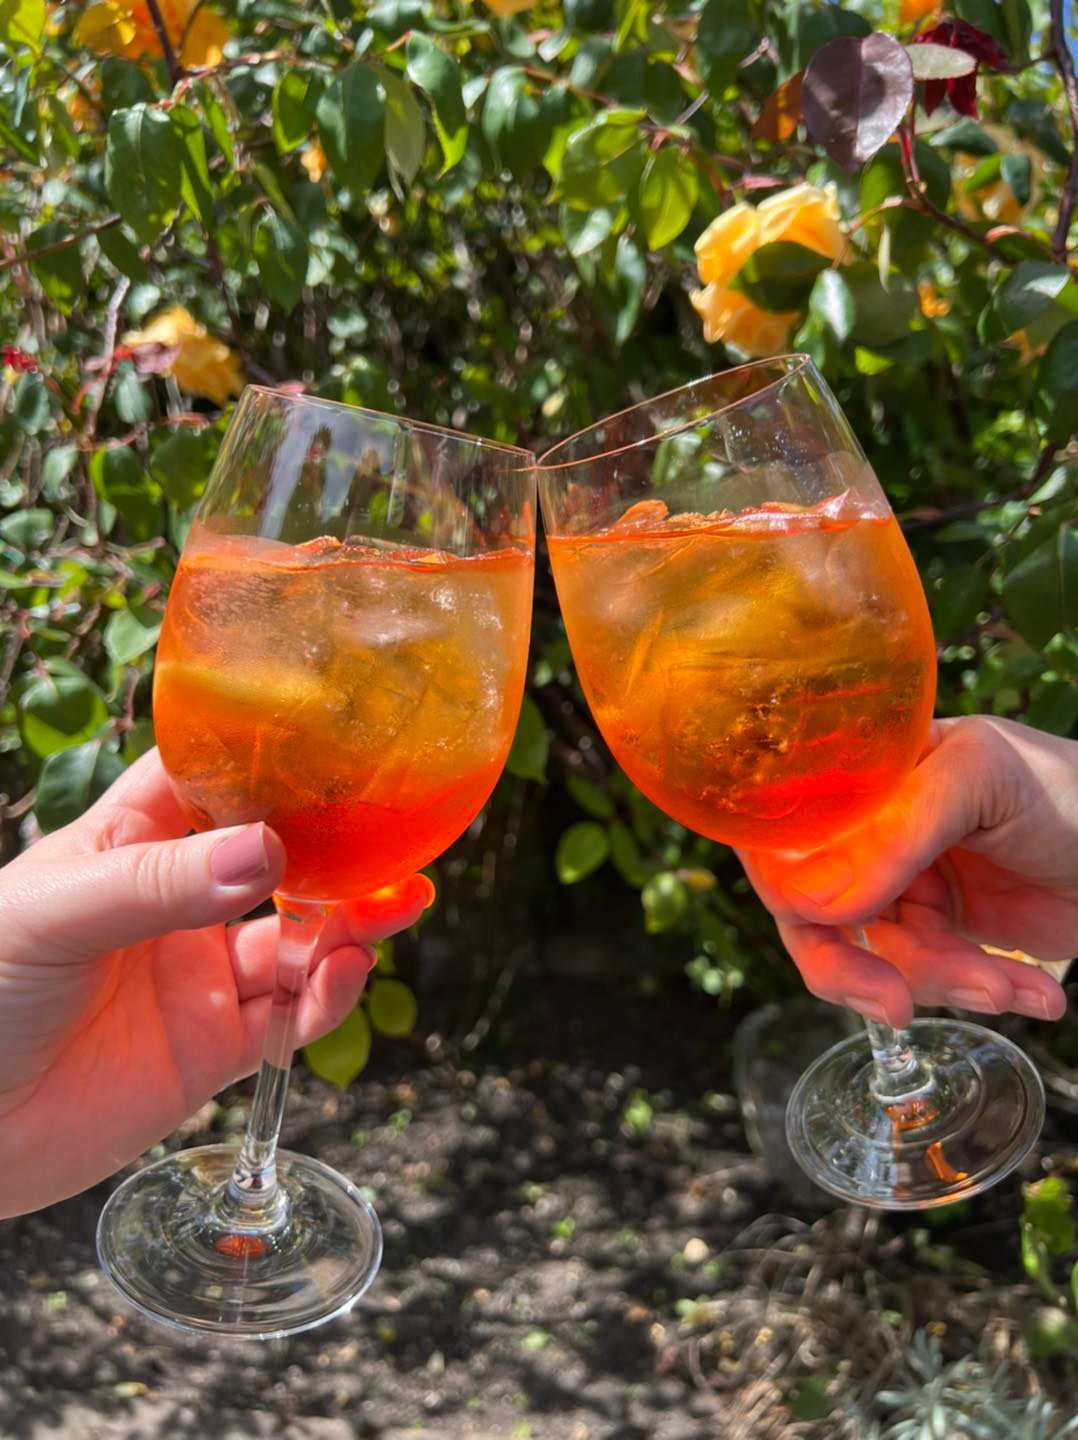 Come & enjoy an Aperol Spritz at the Wig & Quill!